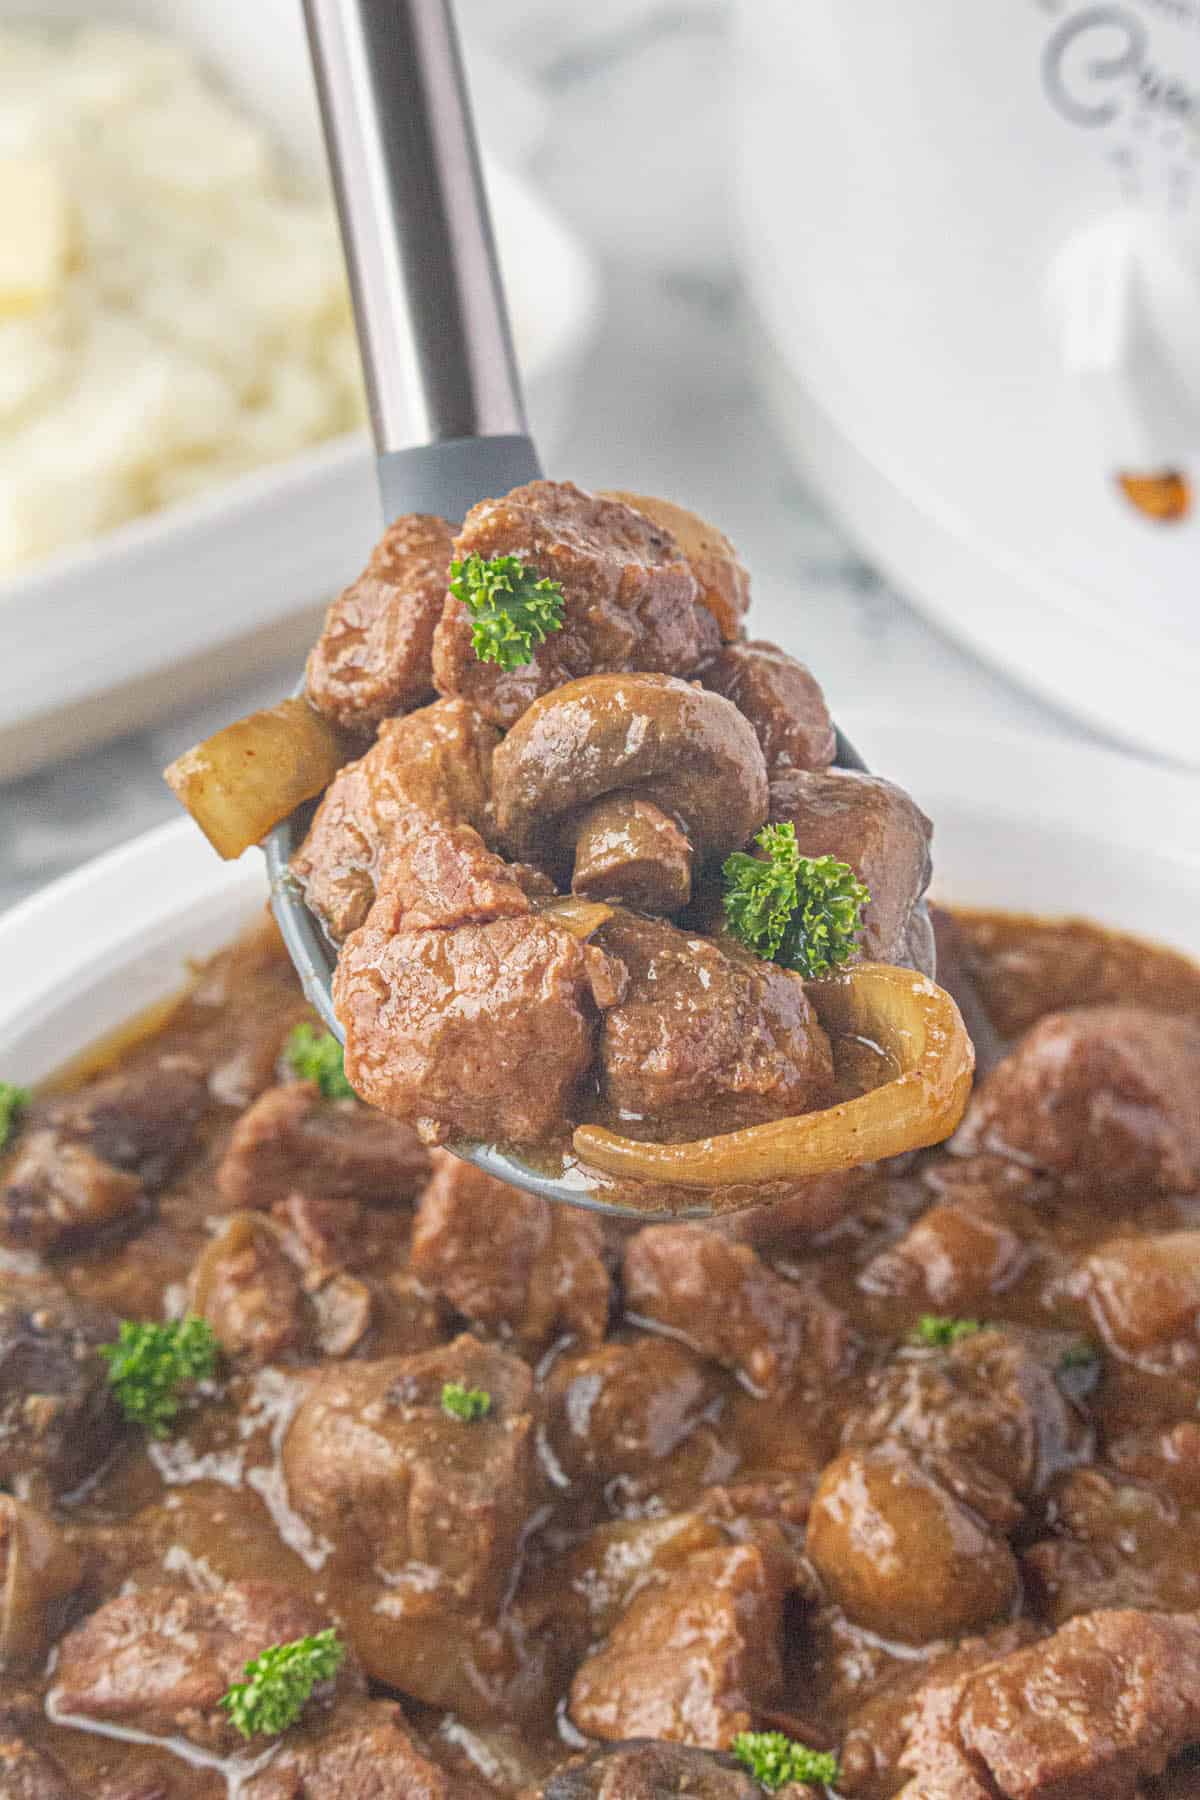 Steak bites in a rich brown gravy with a serving spoon.